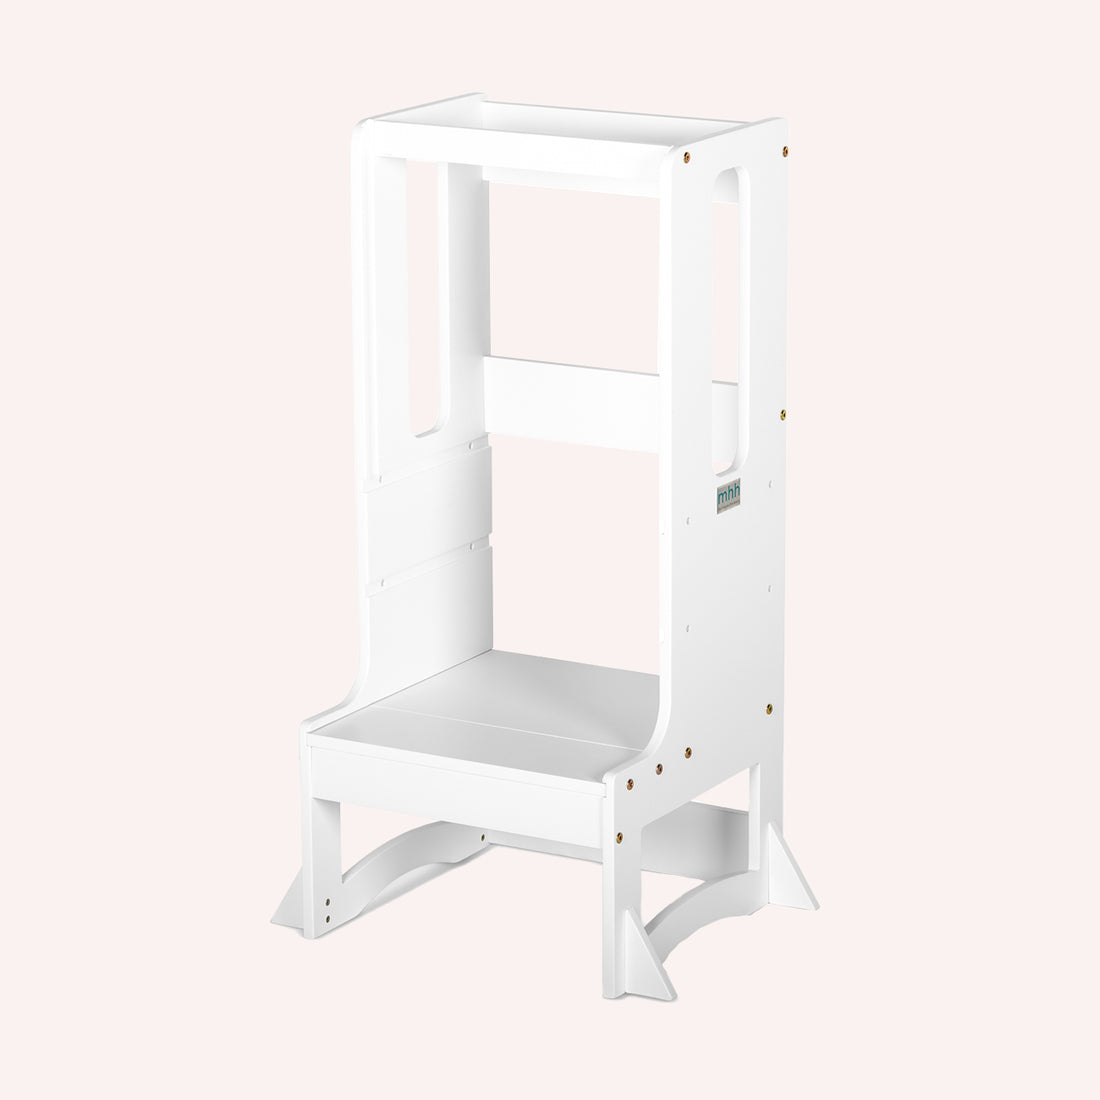 Evo 3.0 Learning Tower - White